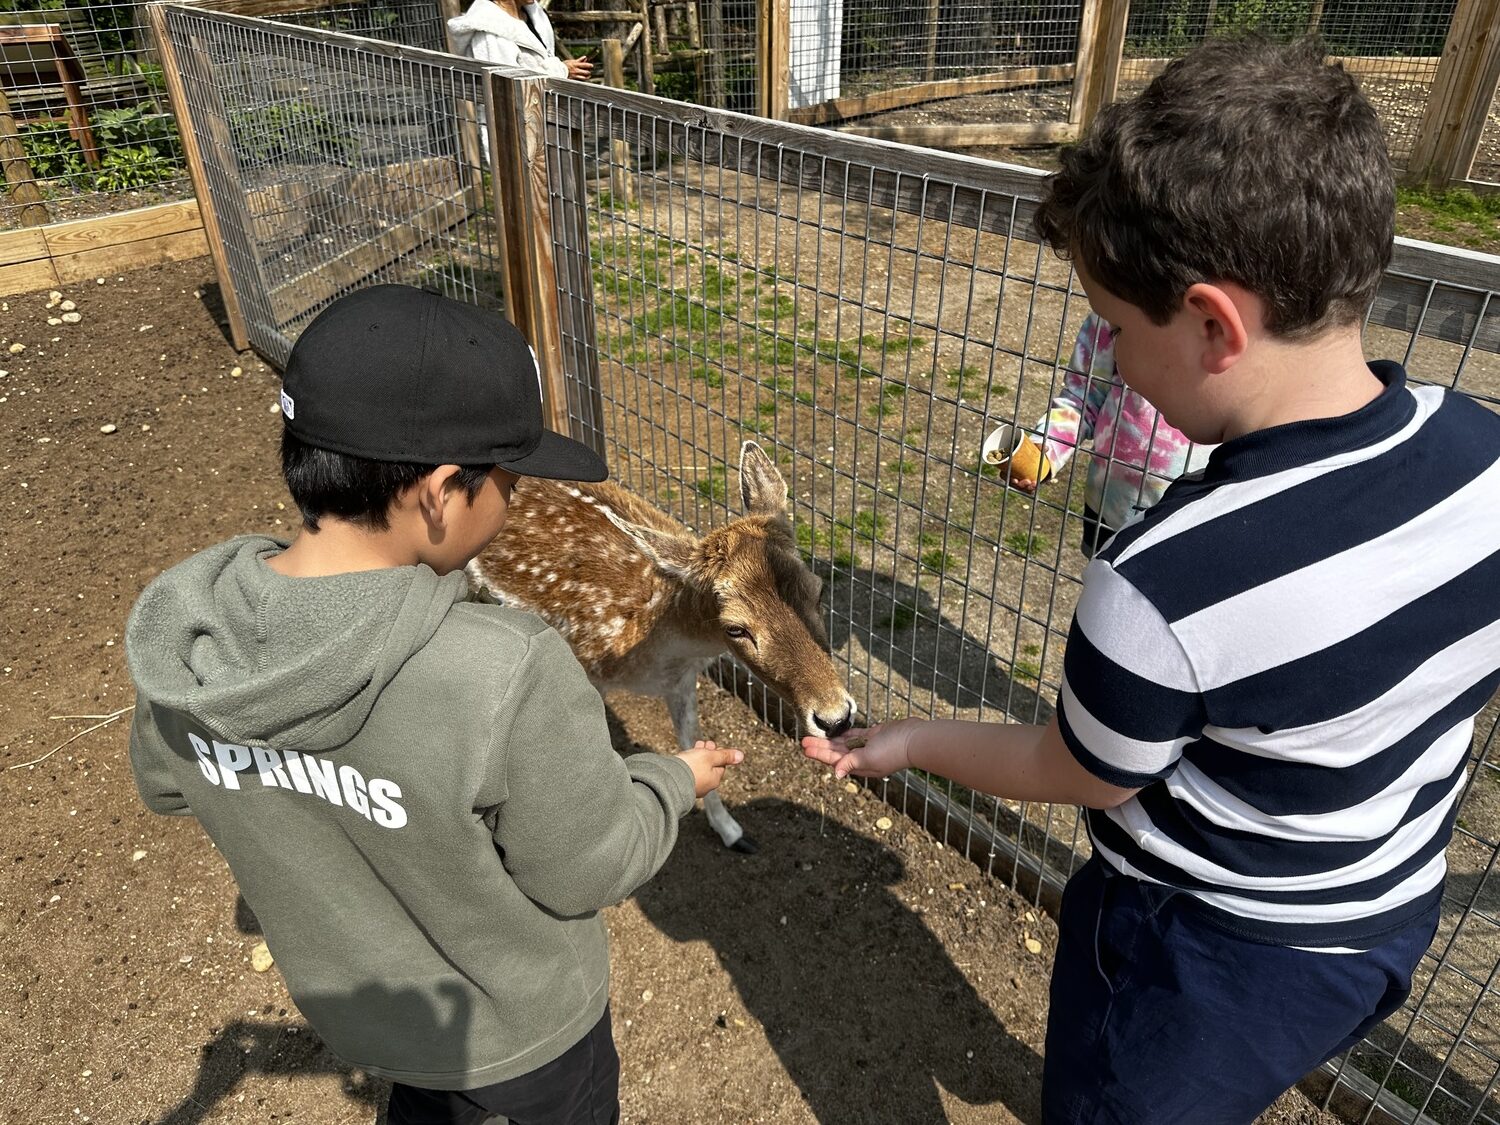 Students from the third grade classes at Springs School went to the Long Island Game Farm in Manorville last Thursday for a spring field trip. KATHRYN MENU